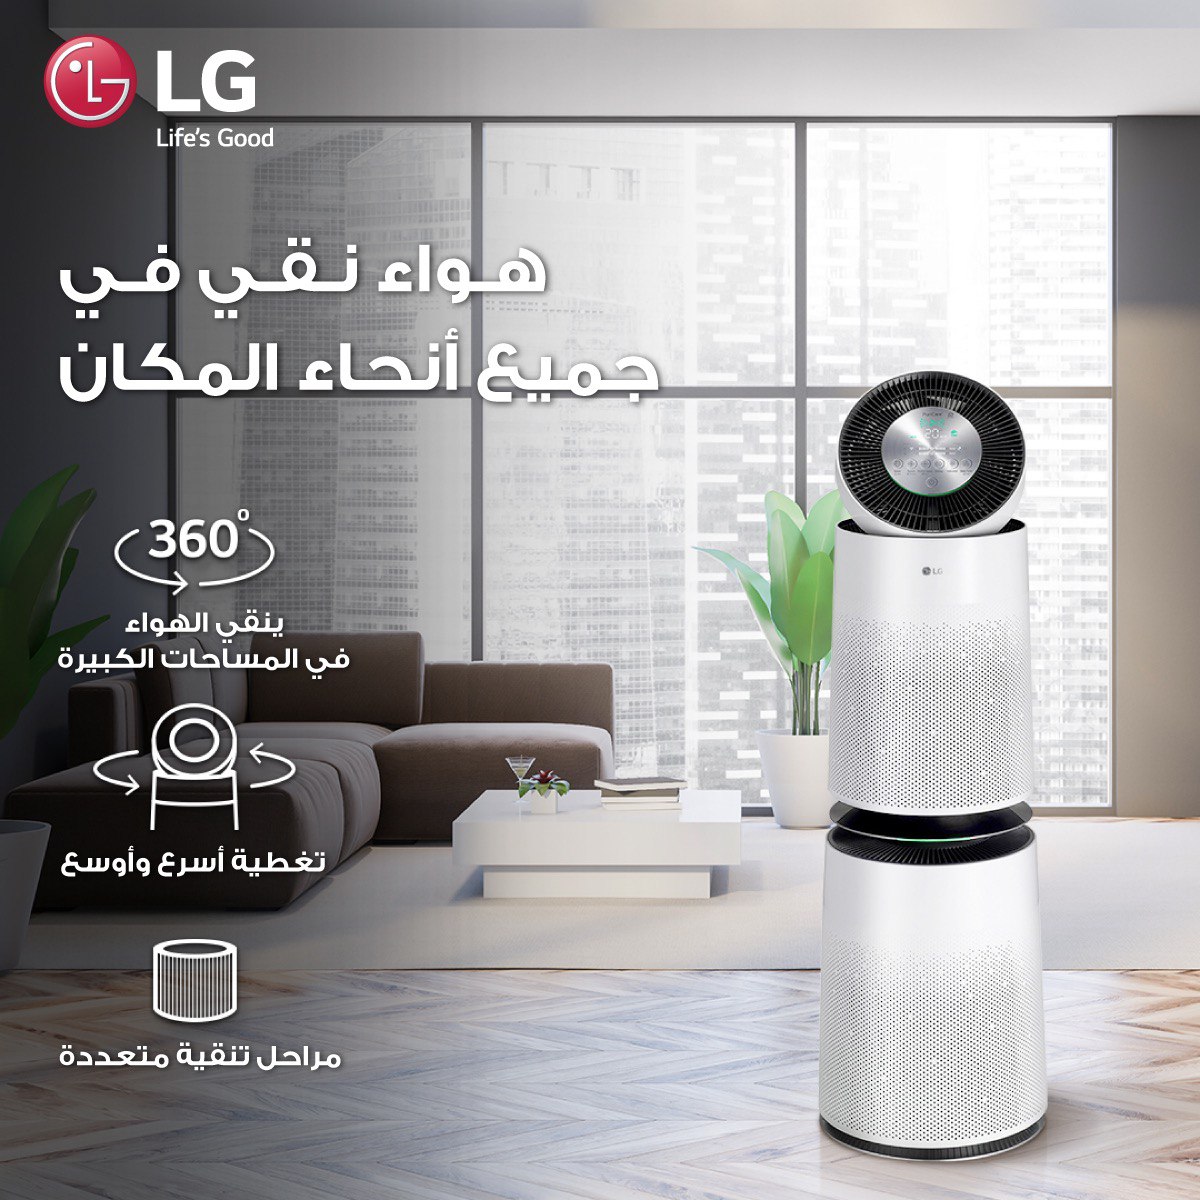 LG's PuriCare makes your home safer.